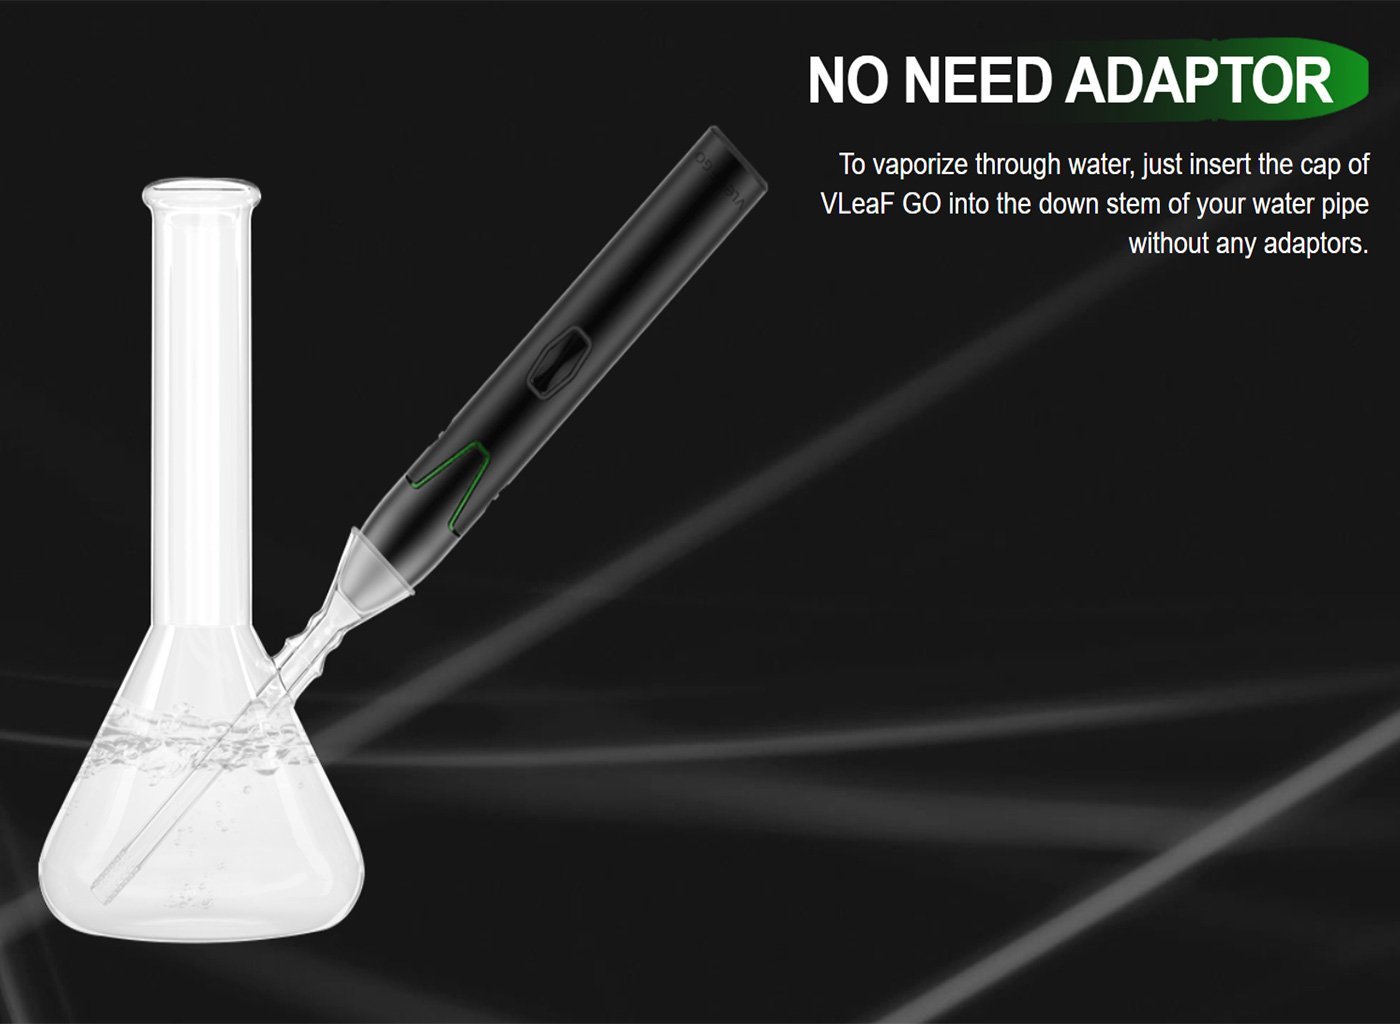 Vivant VLeaf Go convection dry herb vaporizer easily fits into water pipe with no adapters